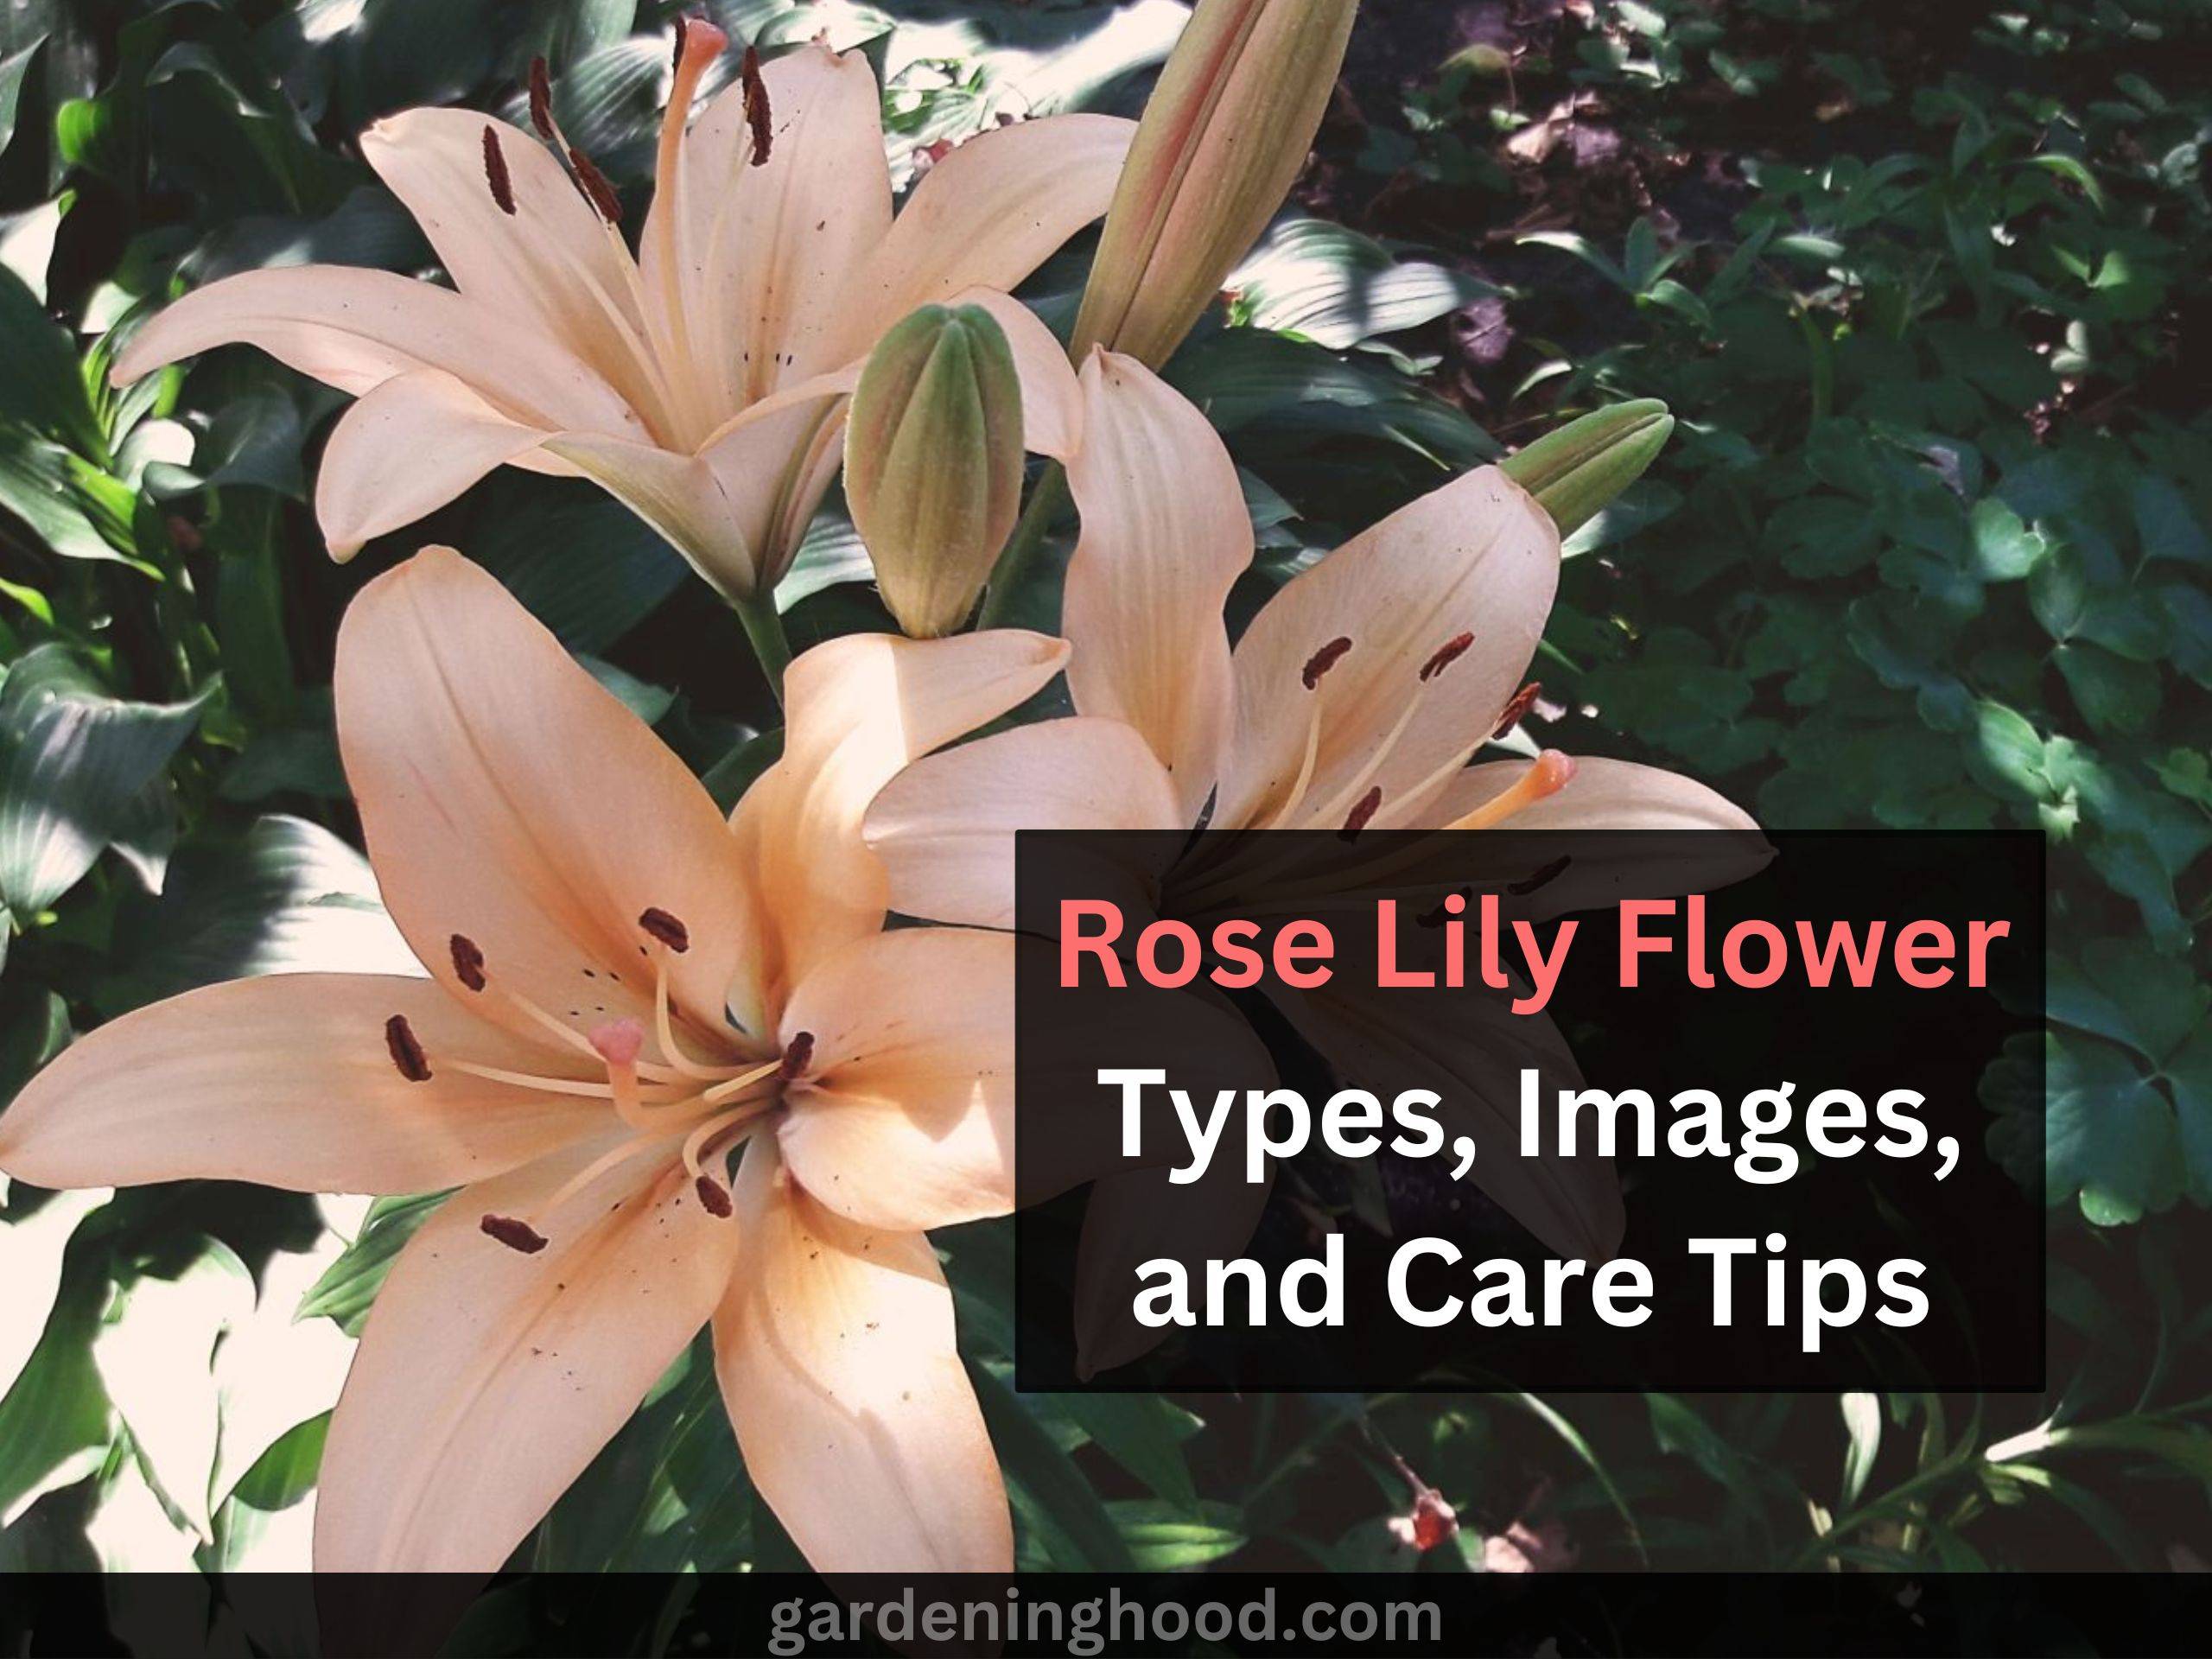 Rose Lily Flower Types, Images, and Care Tips